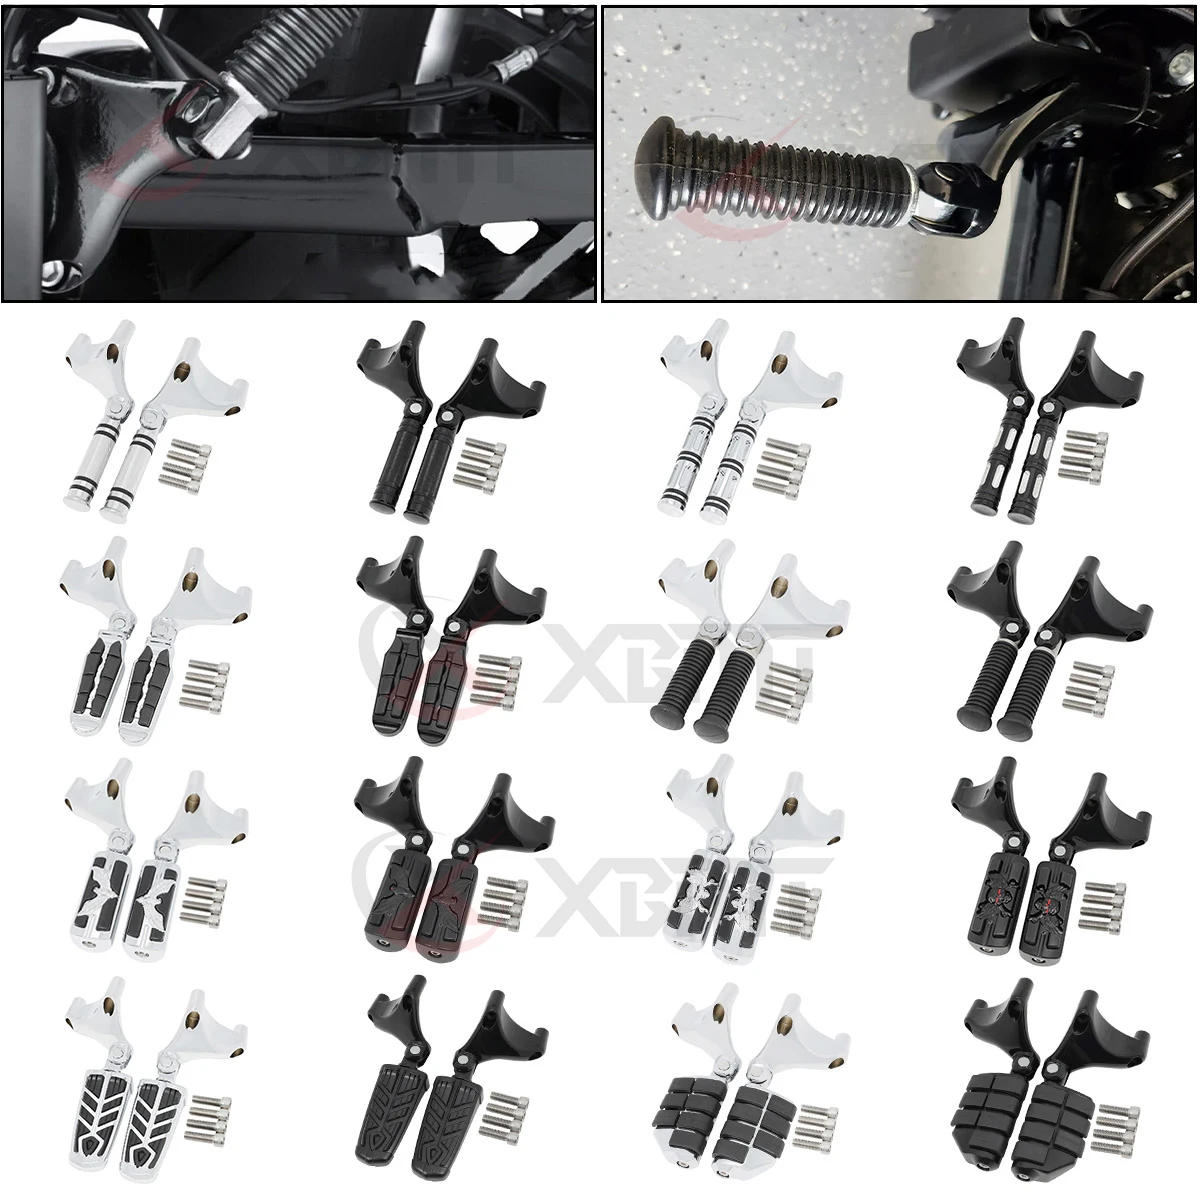 

Motorcycle Rear Footrests Foot Pegs Pedal Mount For Harley Sportster XL1200 Iron XL883 Forty-Eight Seventy-Two 2004-2013